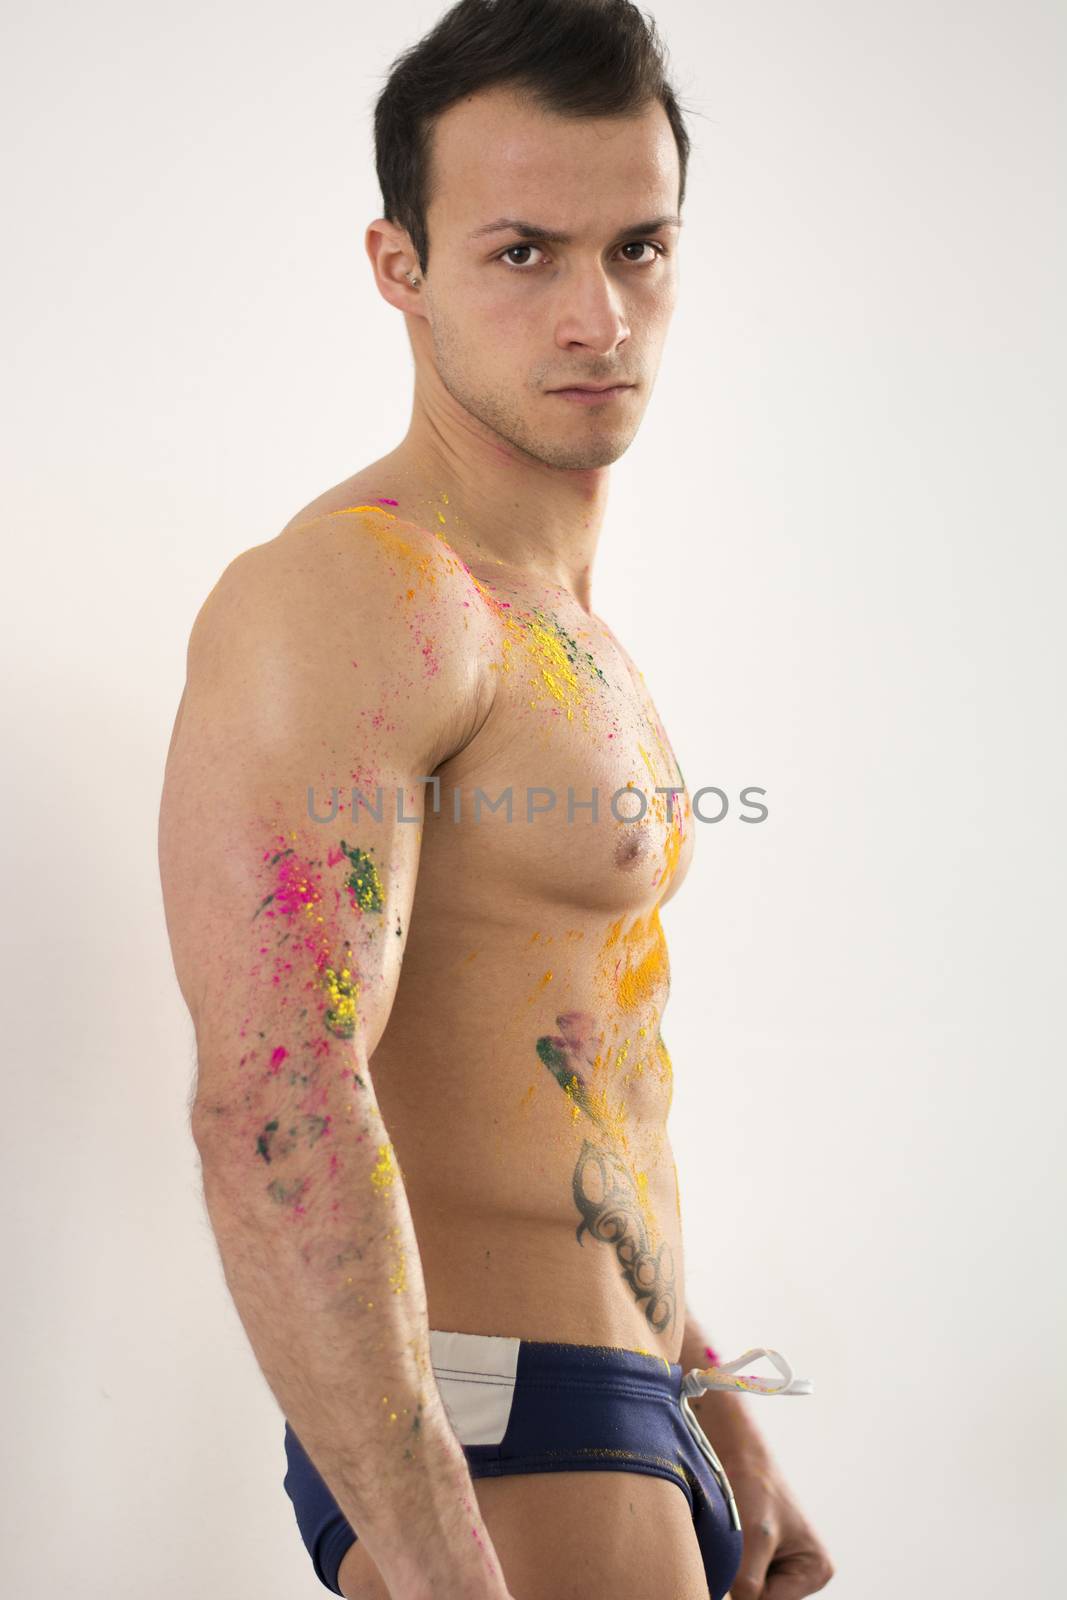 Muscular young man shirtless with skin painted with Holi colors, looking at camera